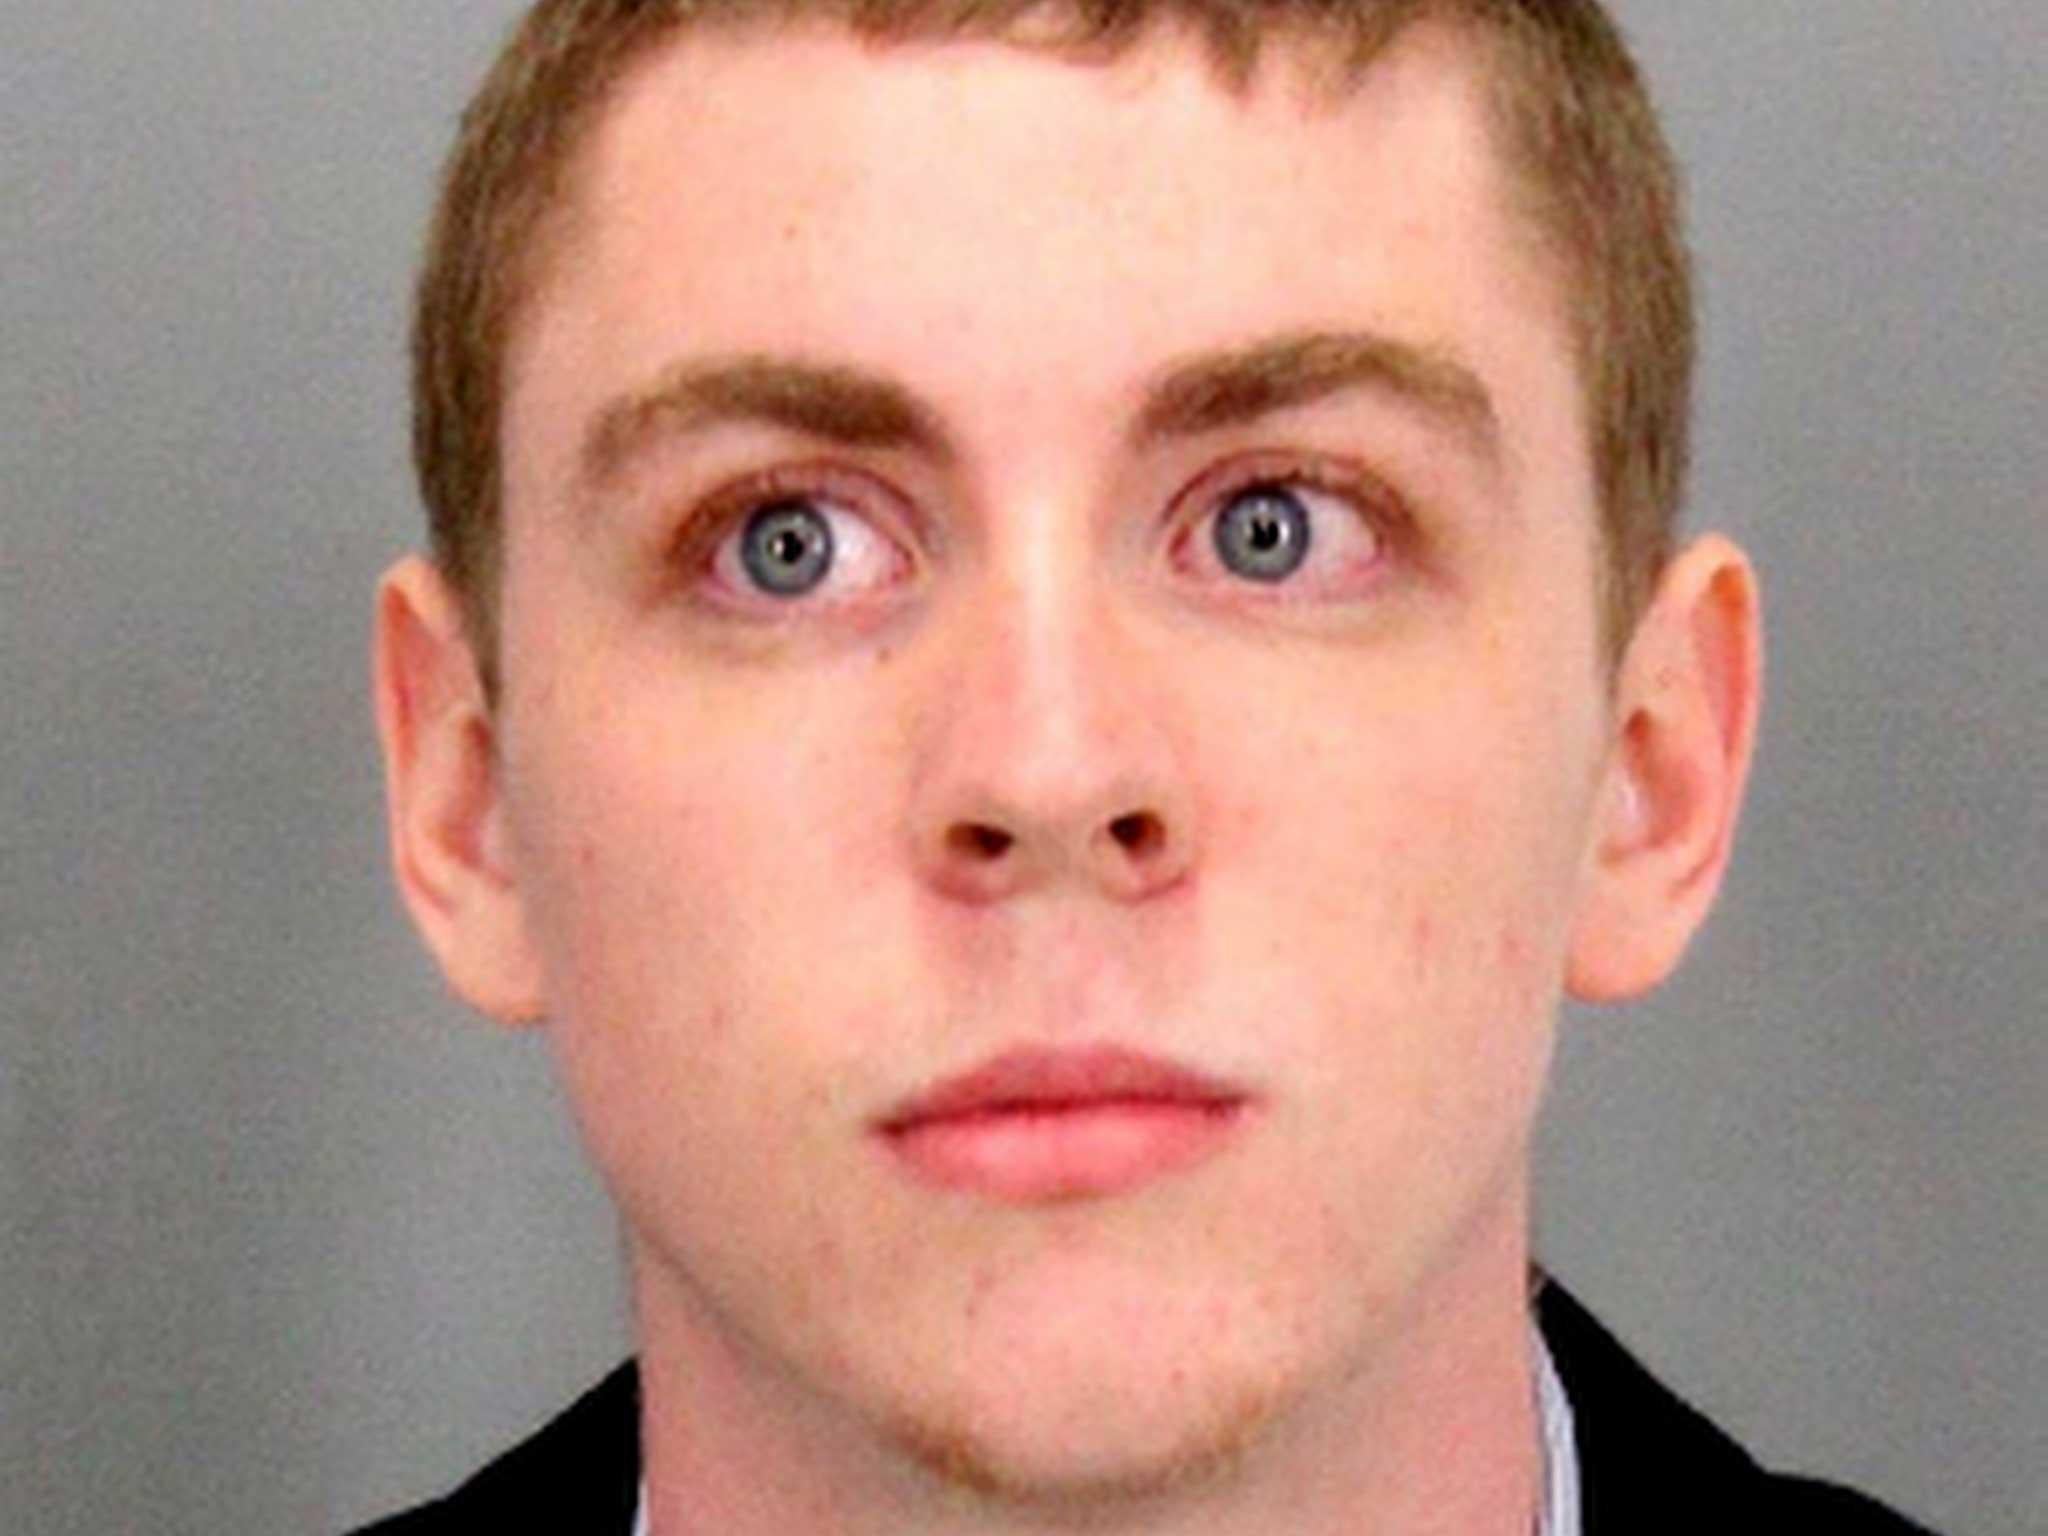 Stanford rape case The simple ways we can protect victims and stop this injustice from happening again The Independent The Independent